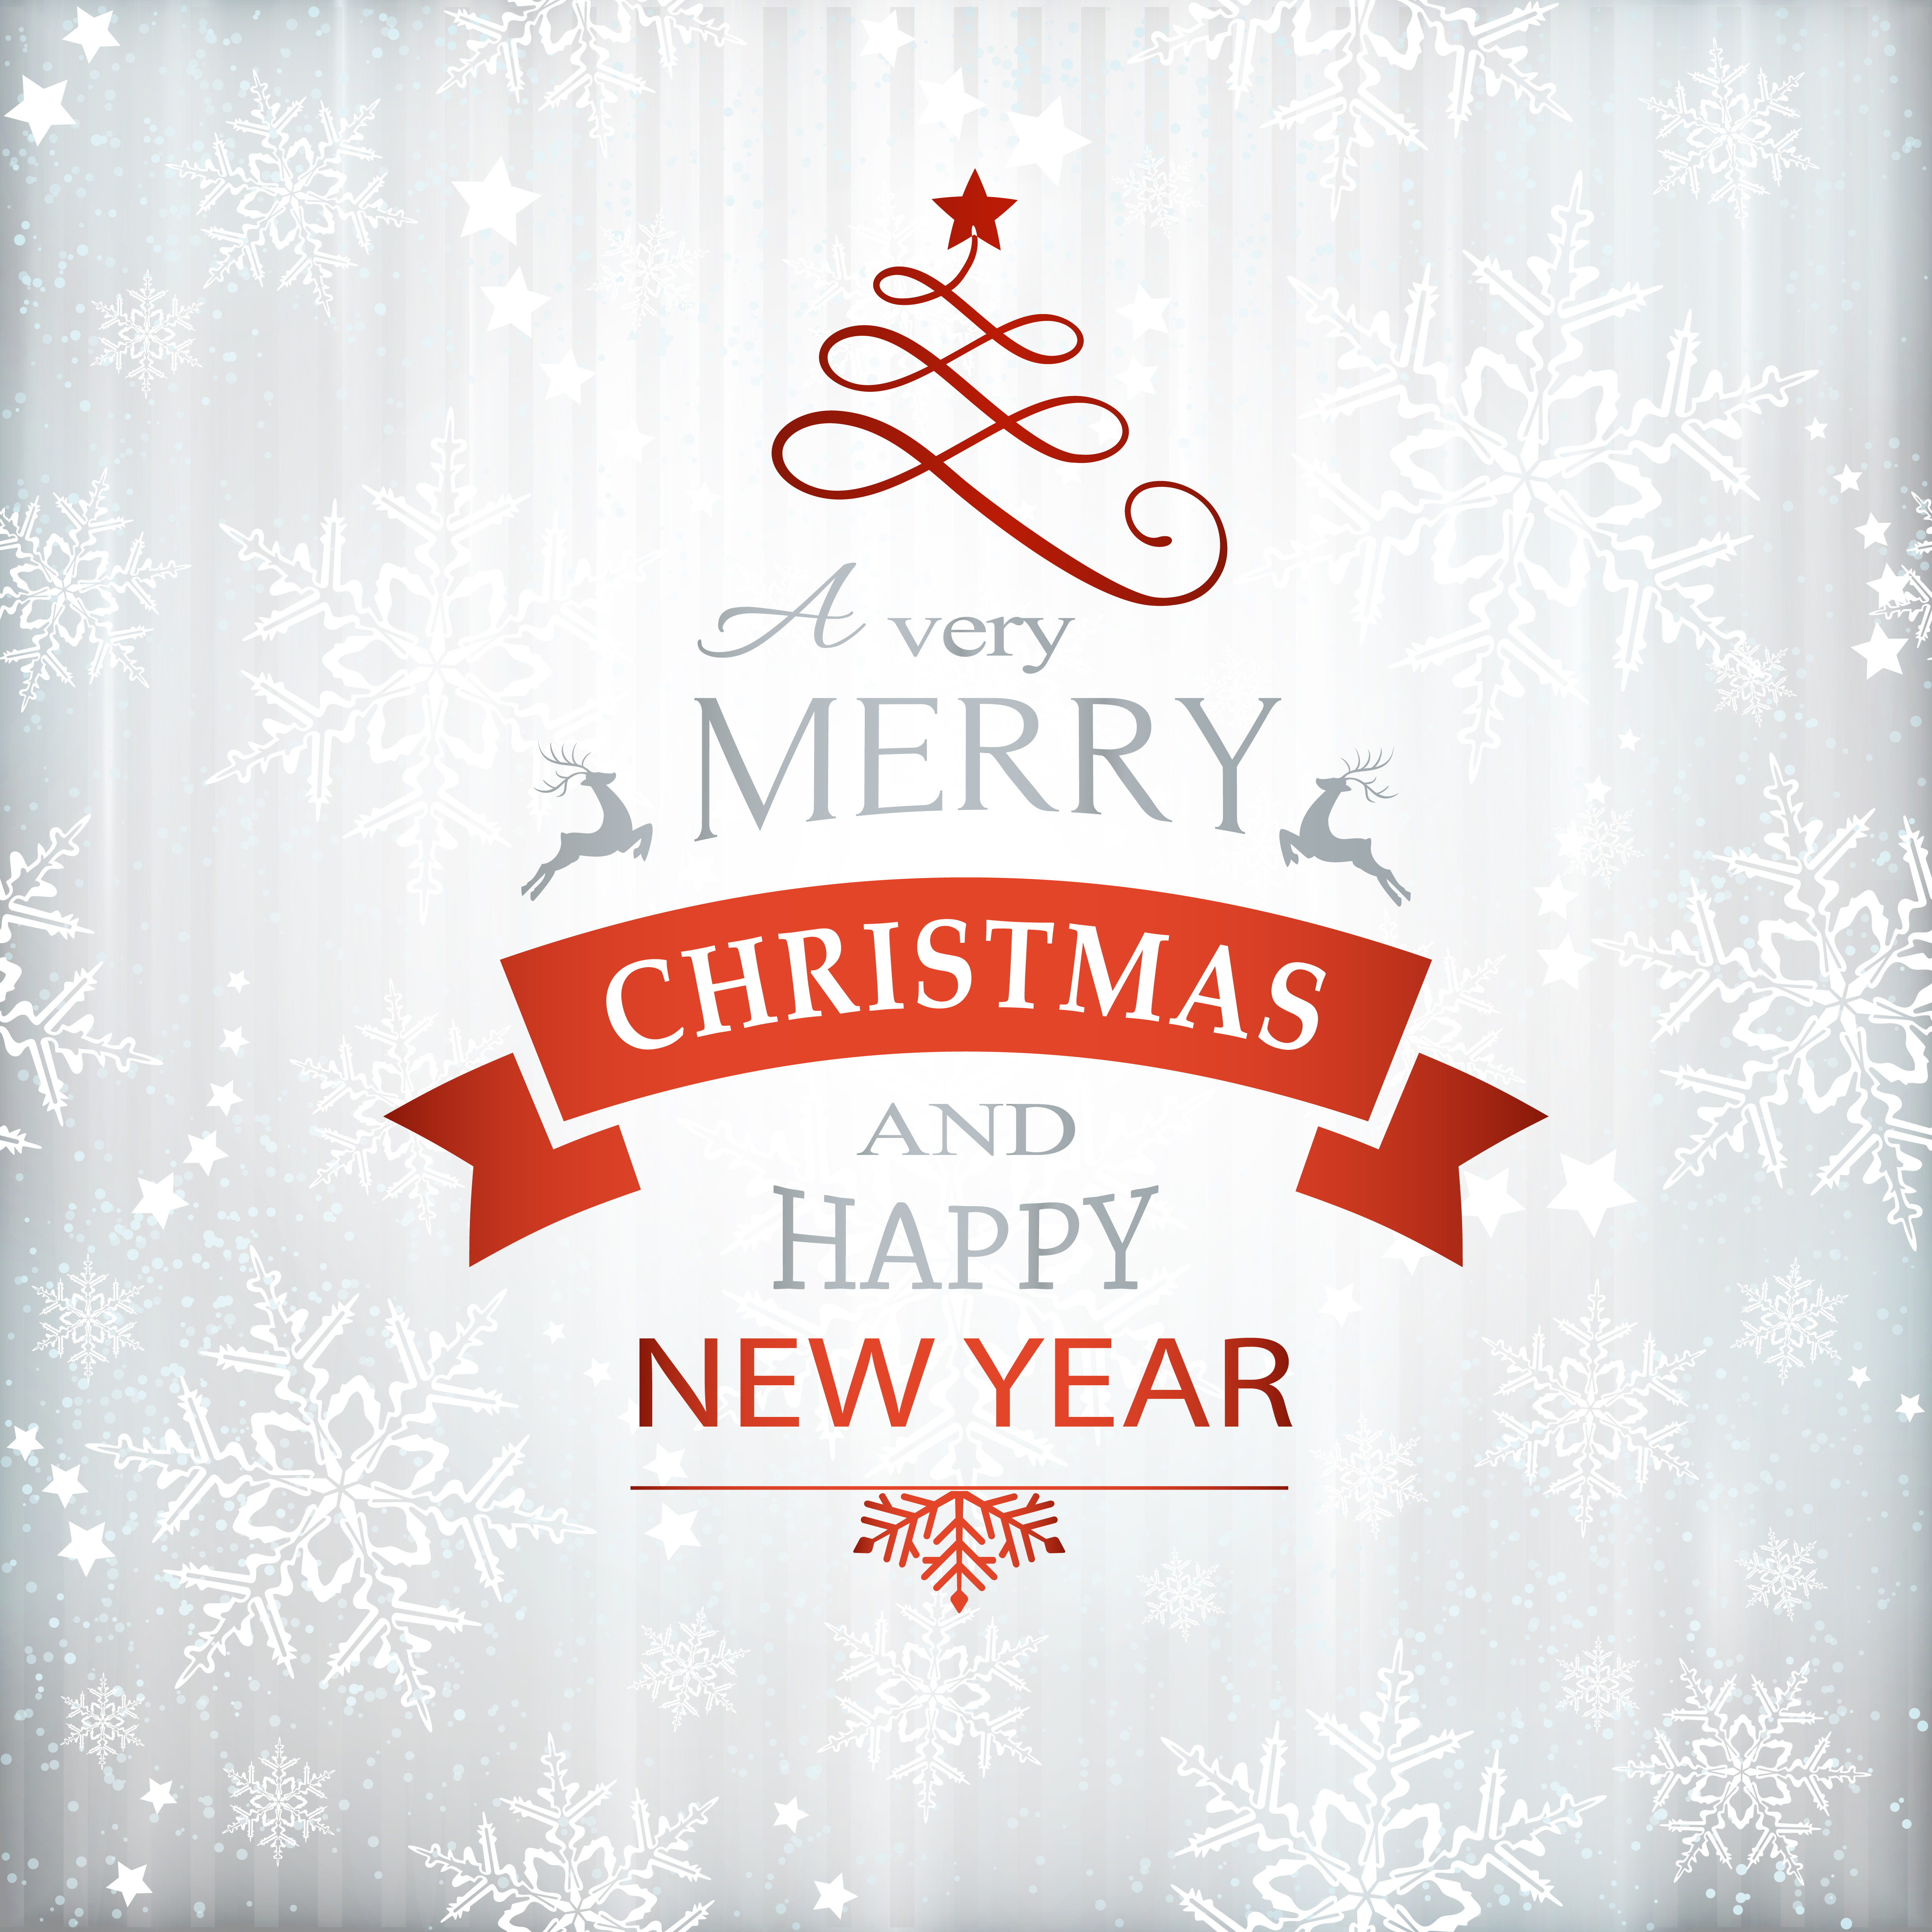 Majors Wishes You A Merry Christmas & Happy New Year